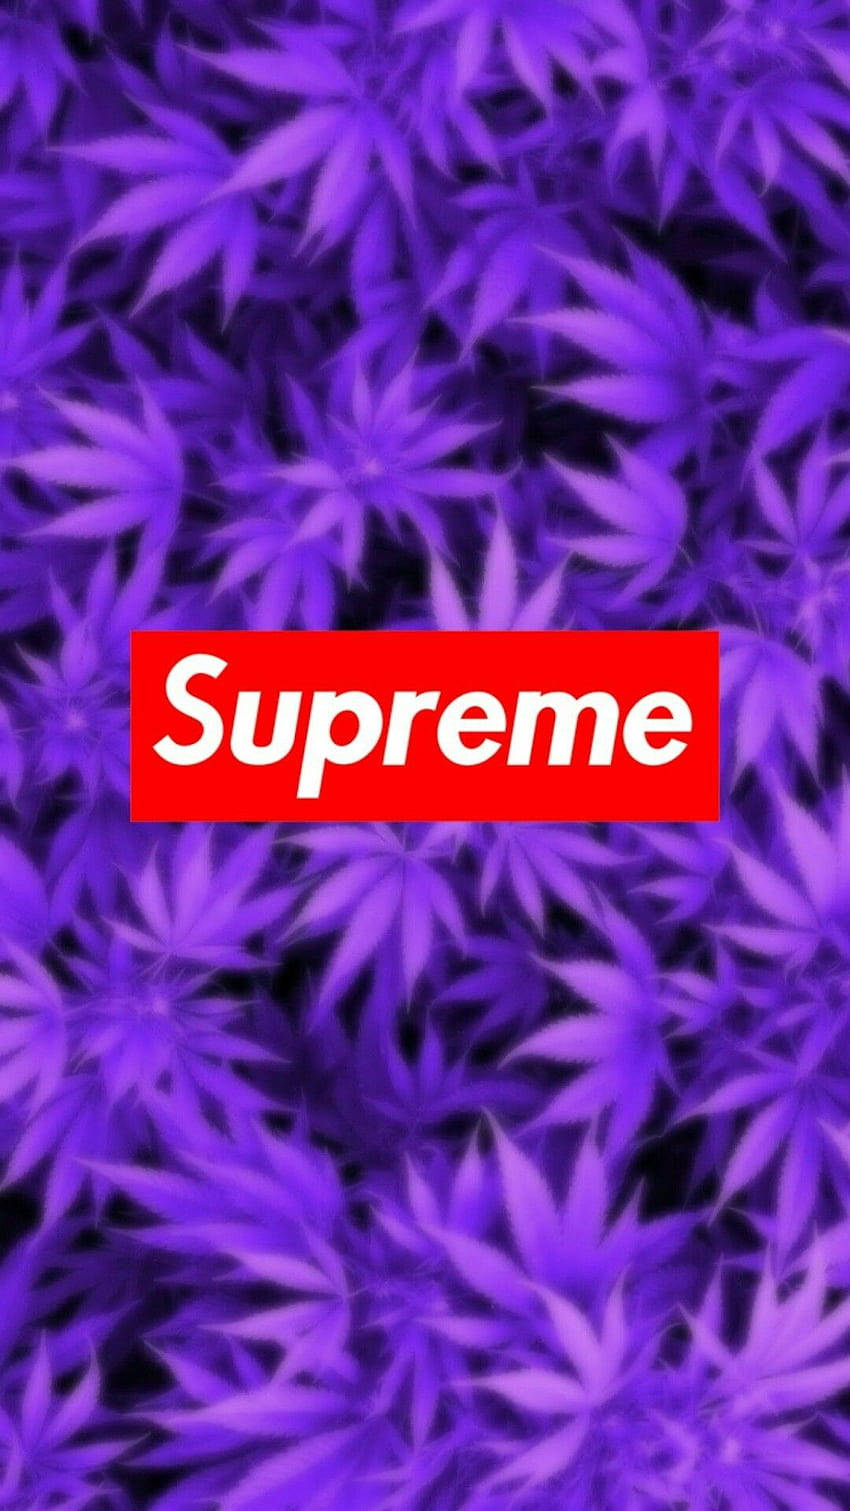 Supreme Aesthetic Red On Purple Wallpaper